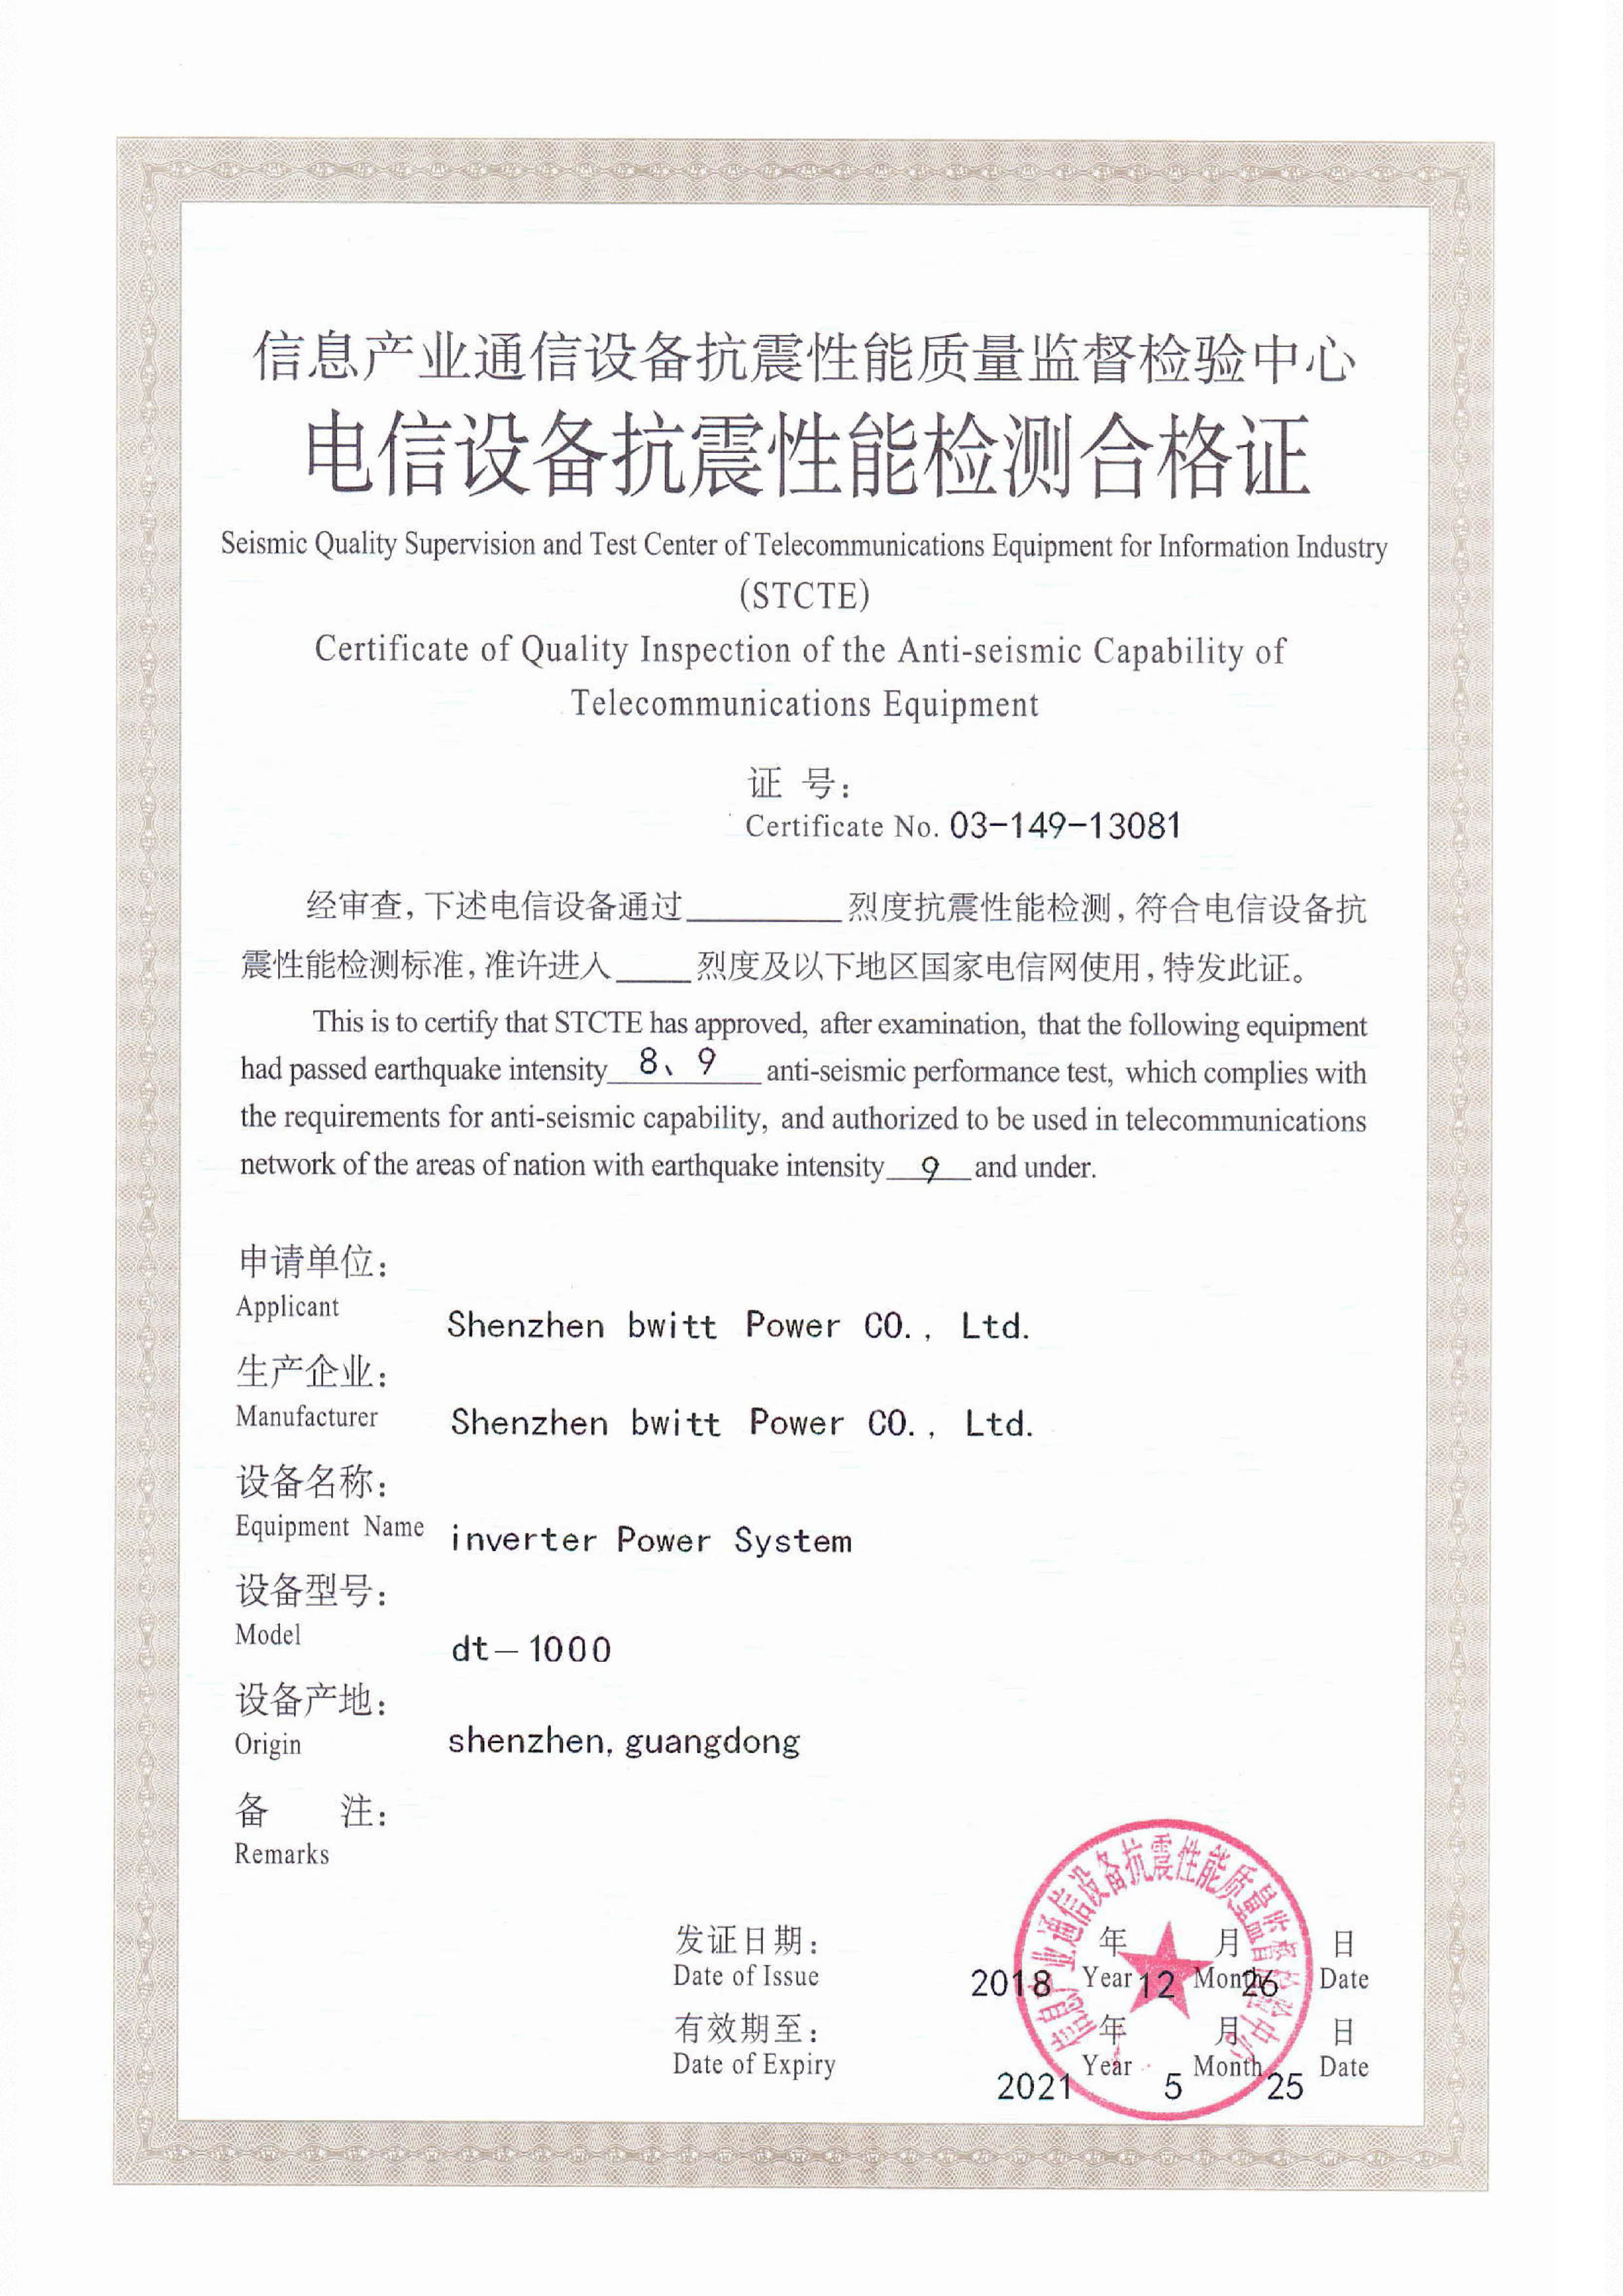 certificate of Quality Inspection of the Anti-Seismic Capability of Telecommunication Equipment